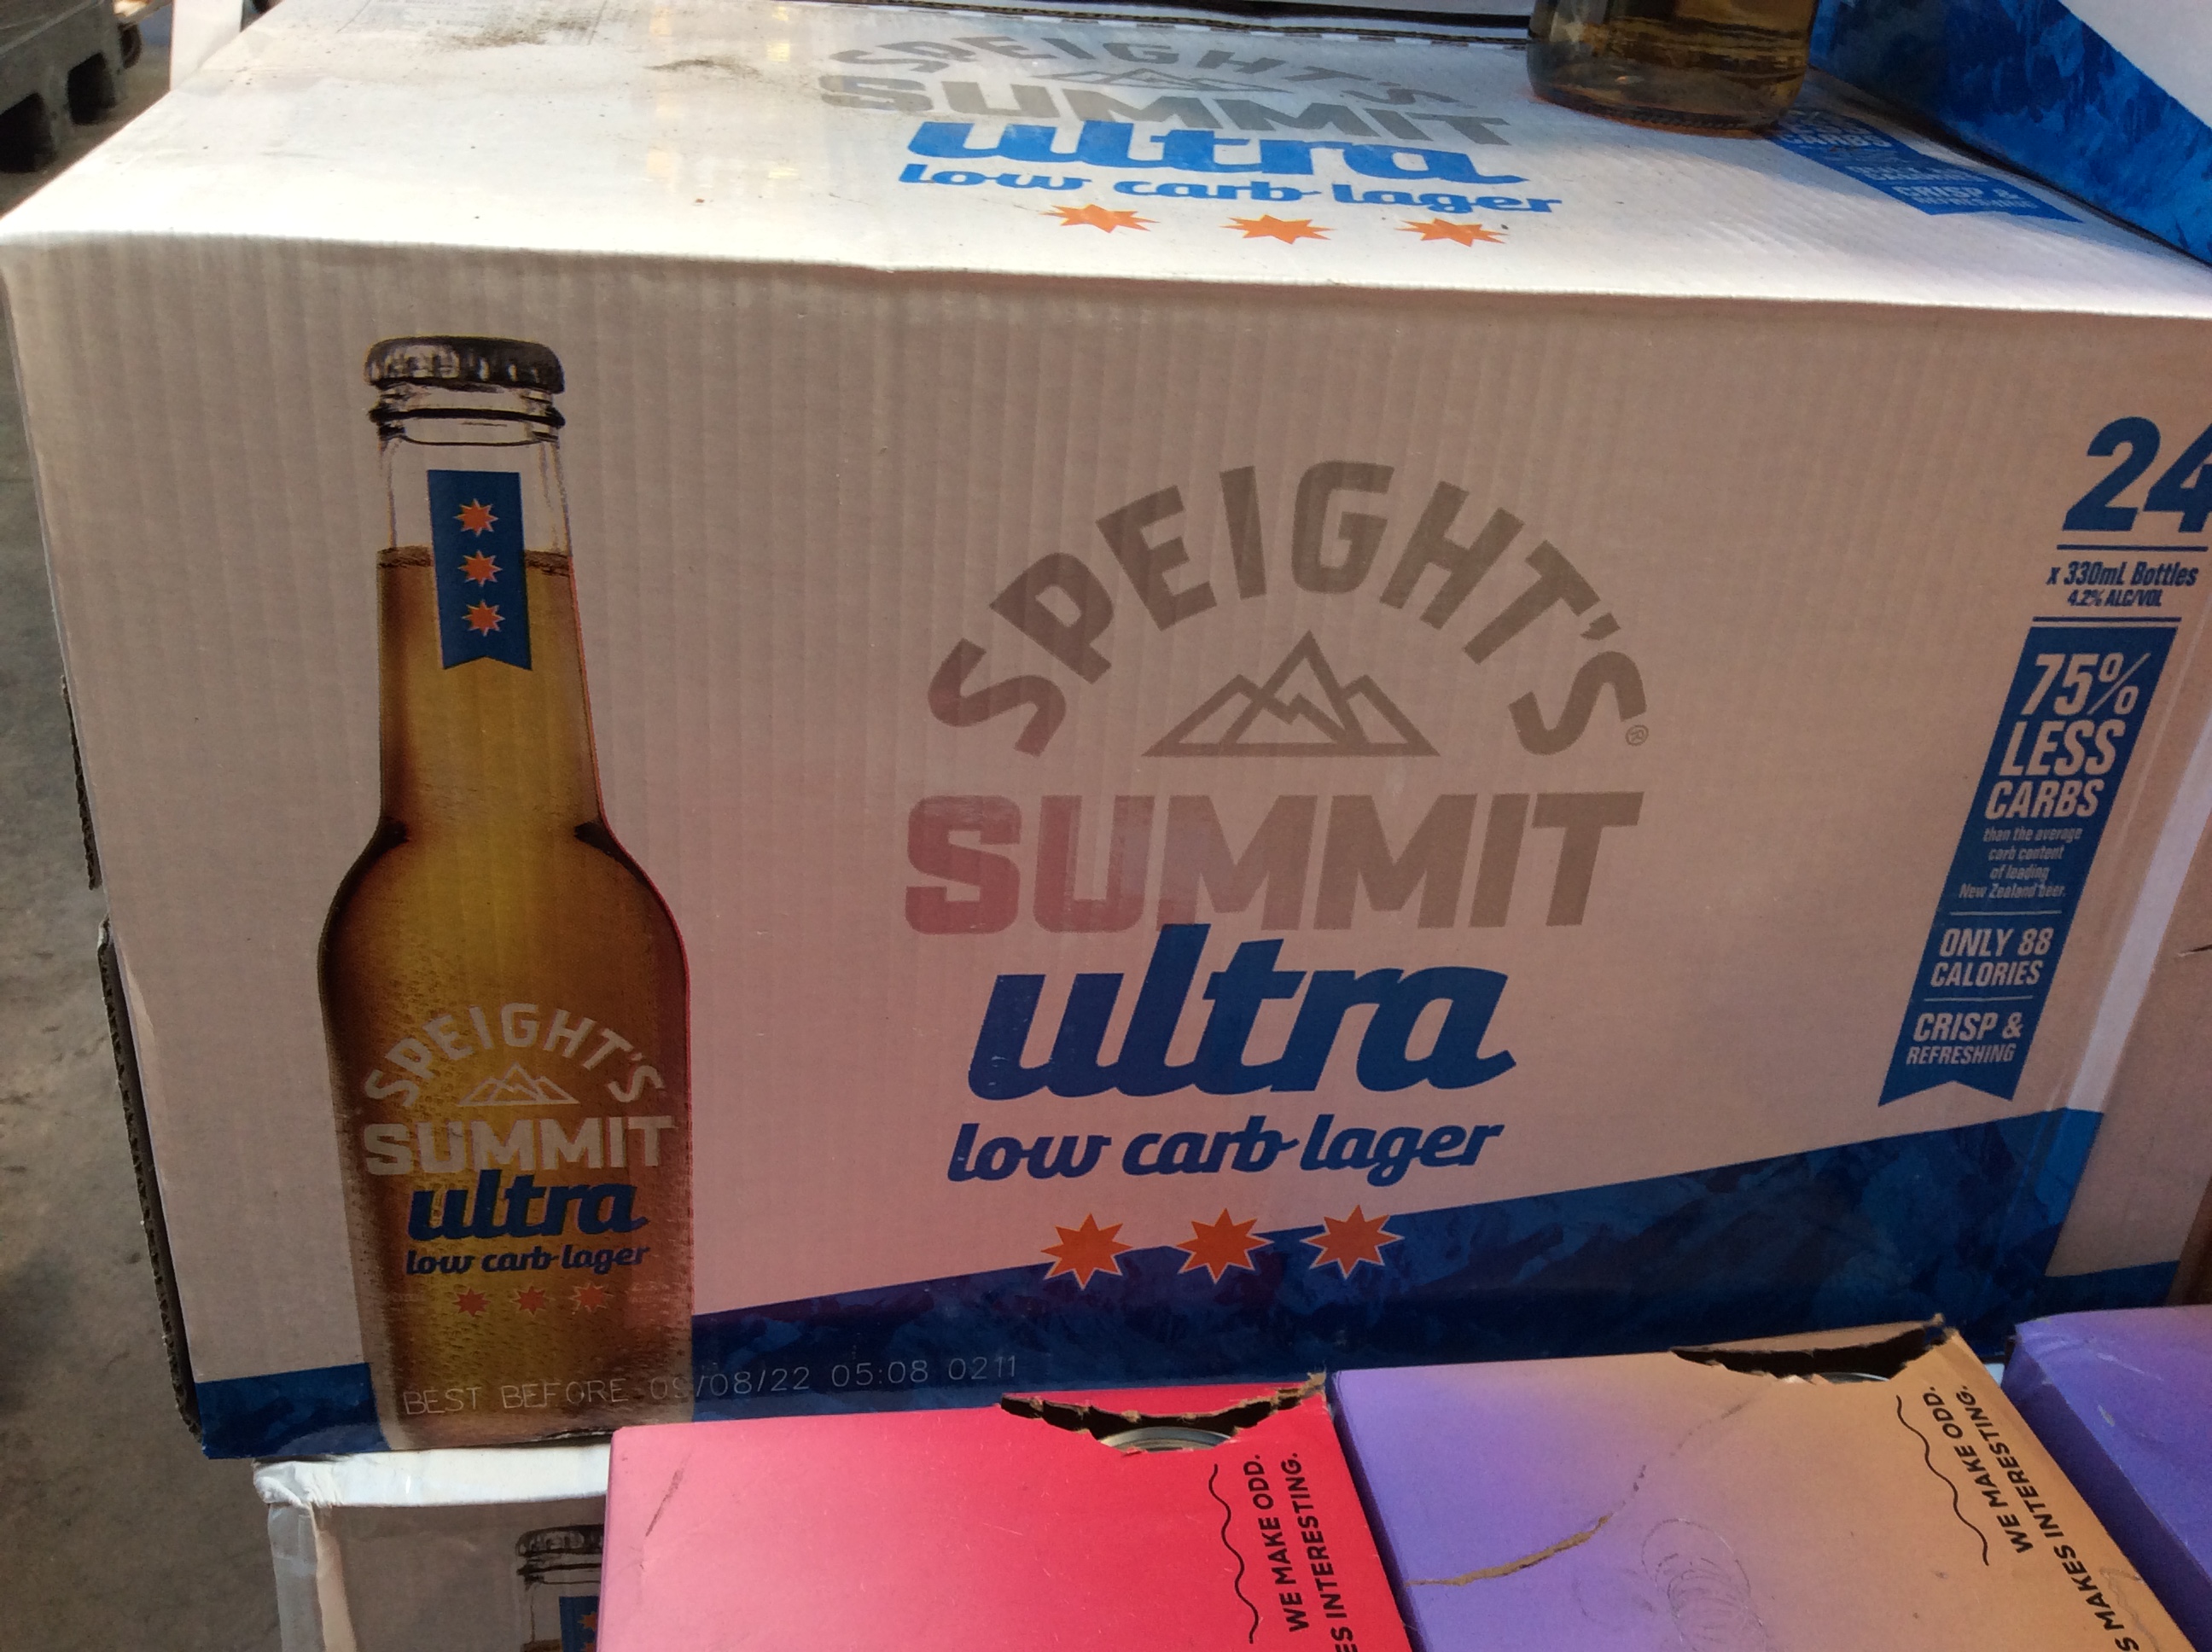 Buy Speight's Summit Beer Lager Ultra Low Carb online at